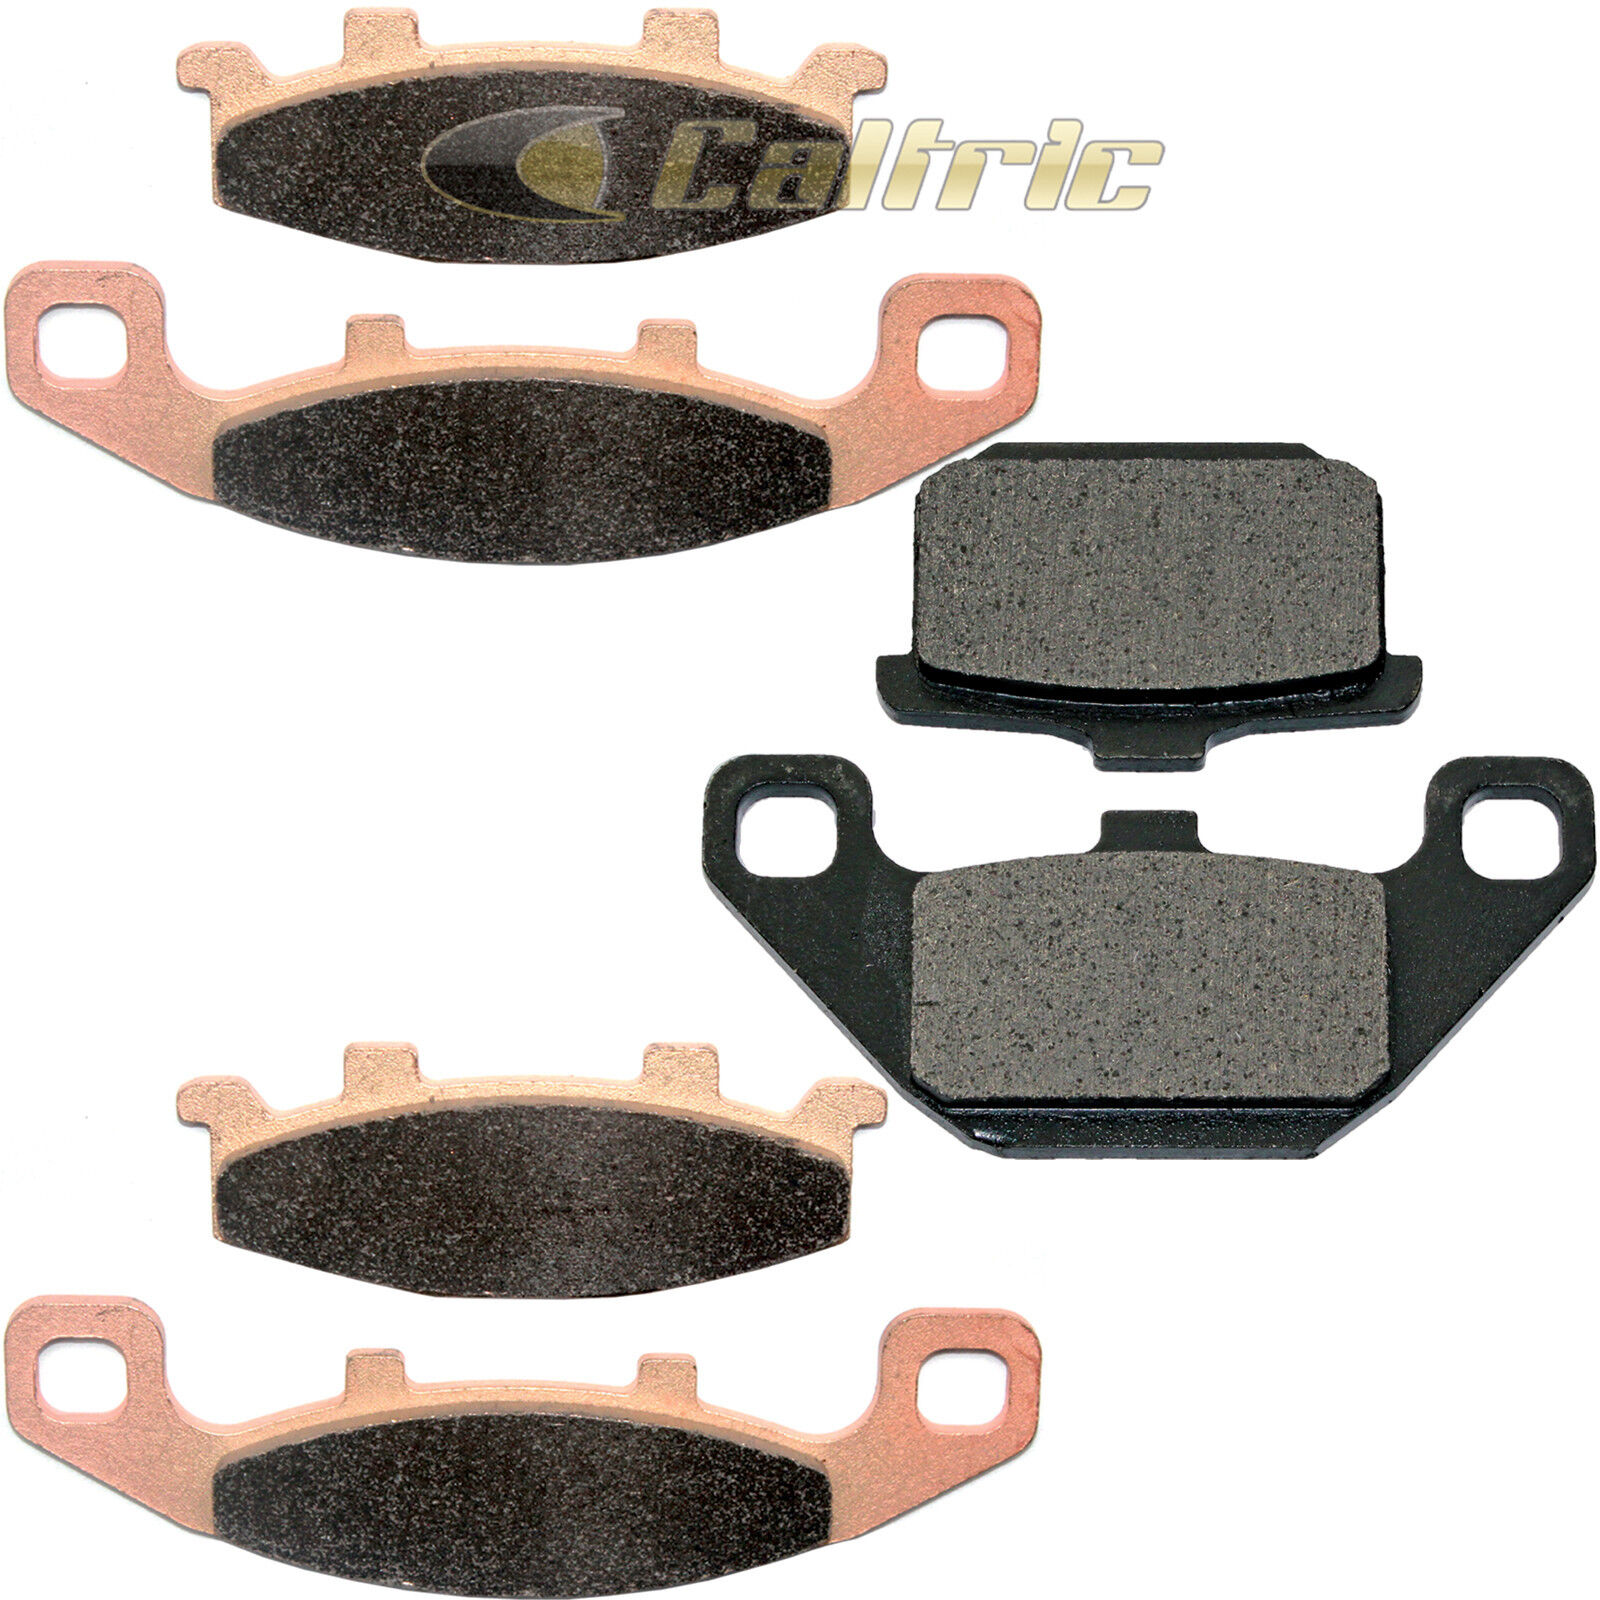 Front & Rear Brake Pads for Kawasaki ZG1000 Concours 1000 1994-2006